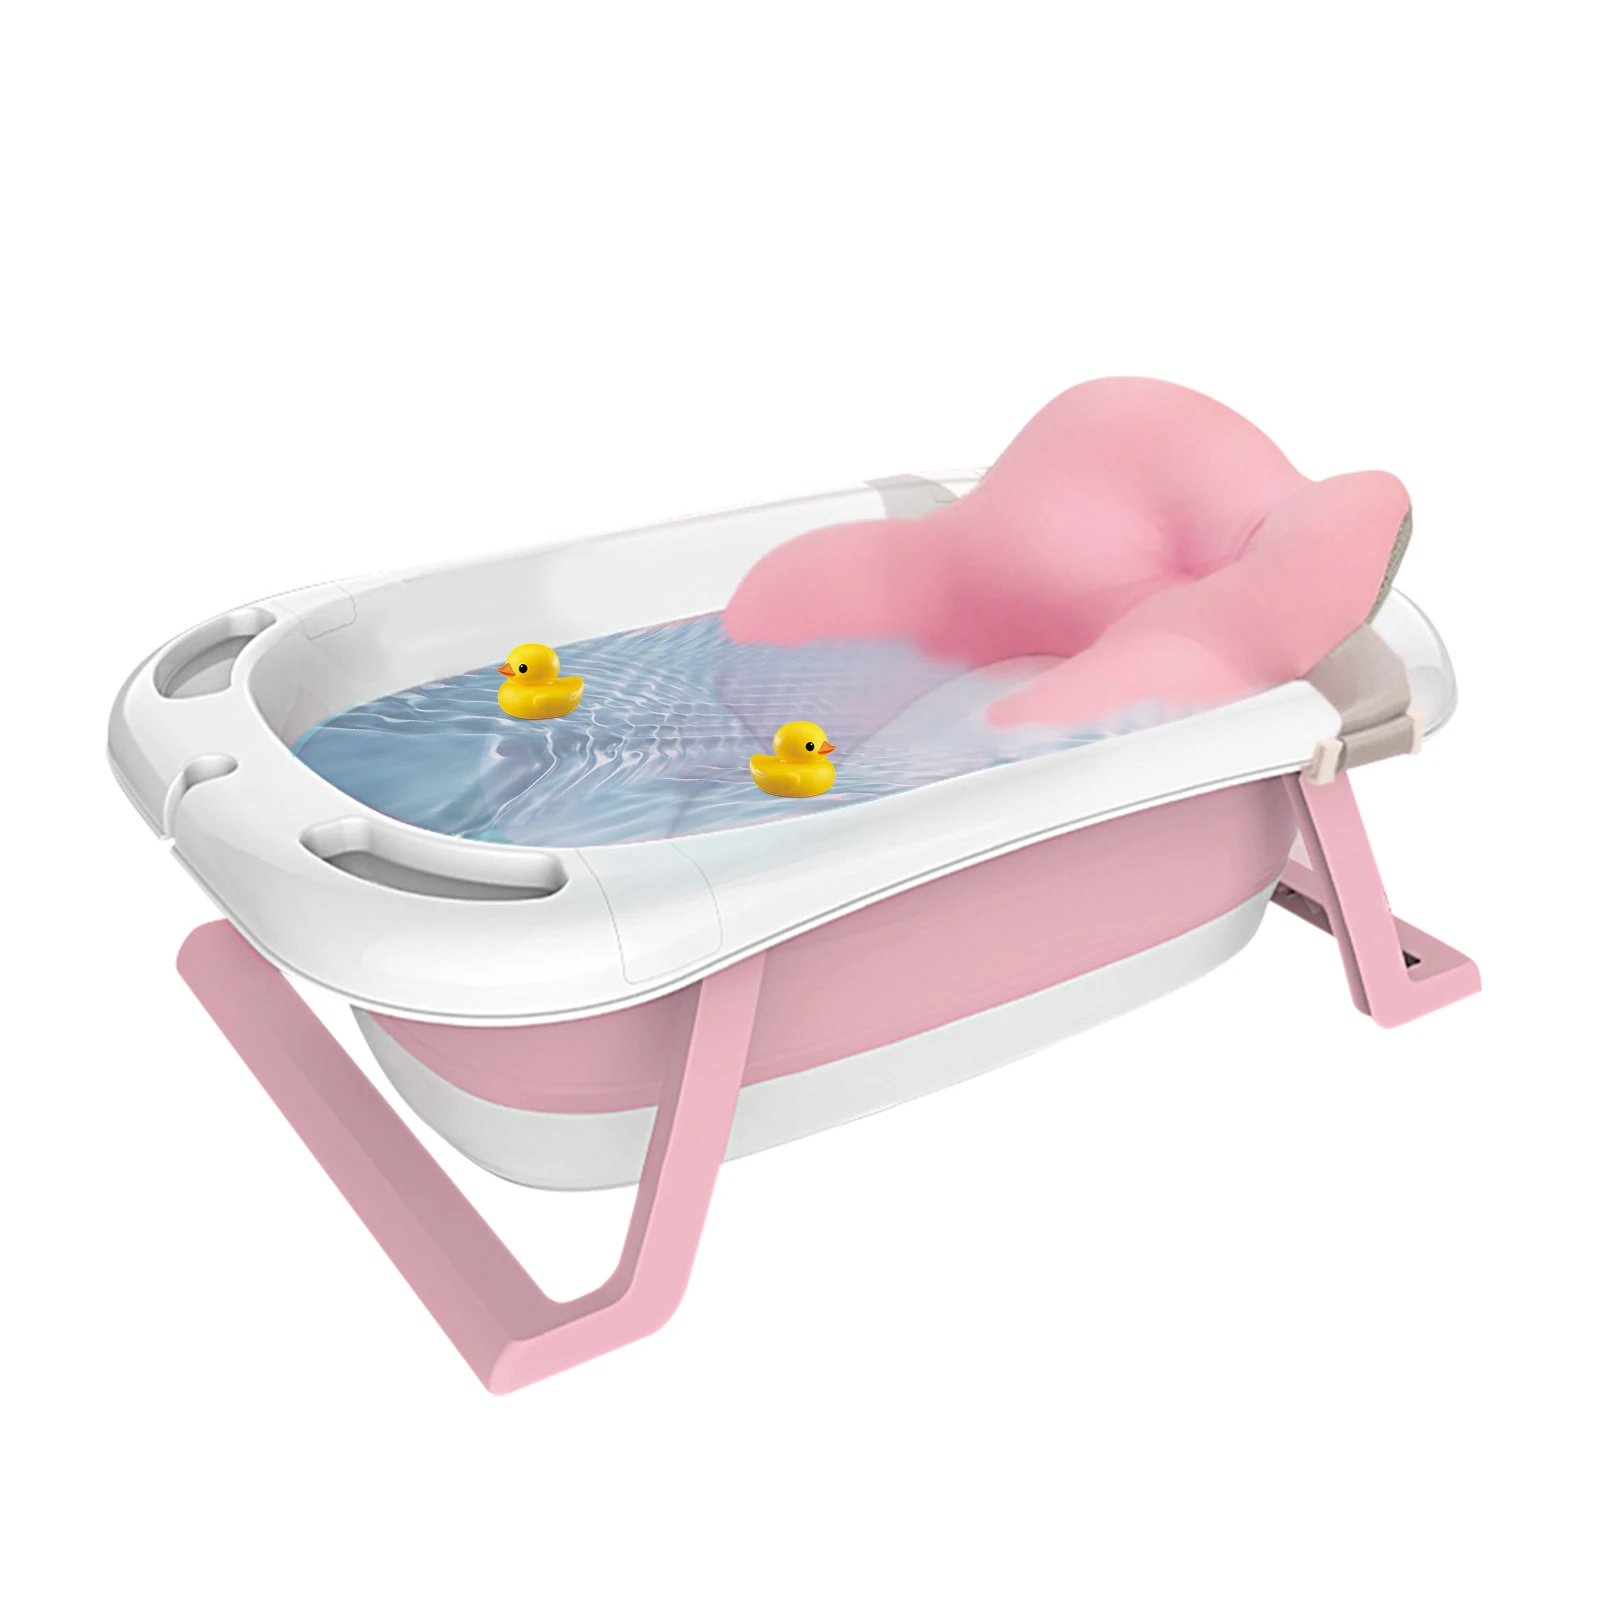 

Foldable Bathtub For Newborns Portable Toddler Shower Bathing Tubs For Home Collapsible Babies Tubs Bathroom Supplies With Two